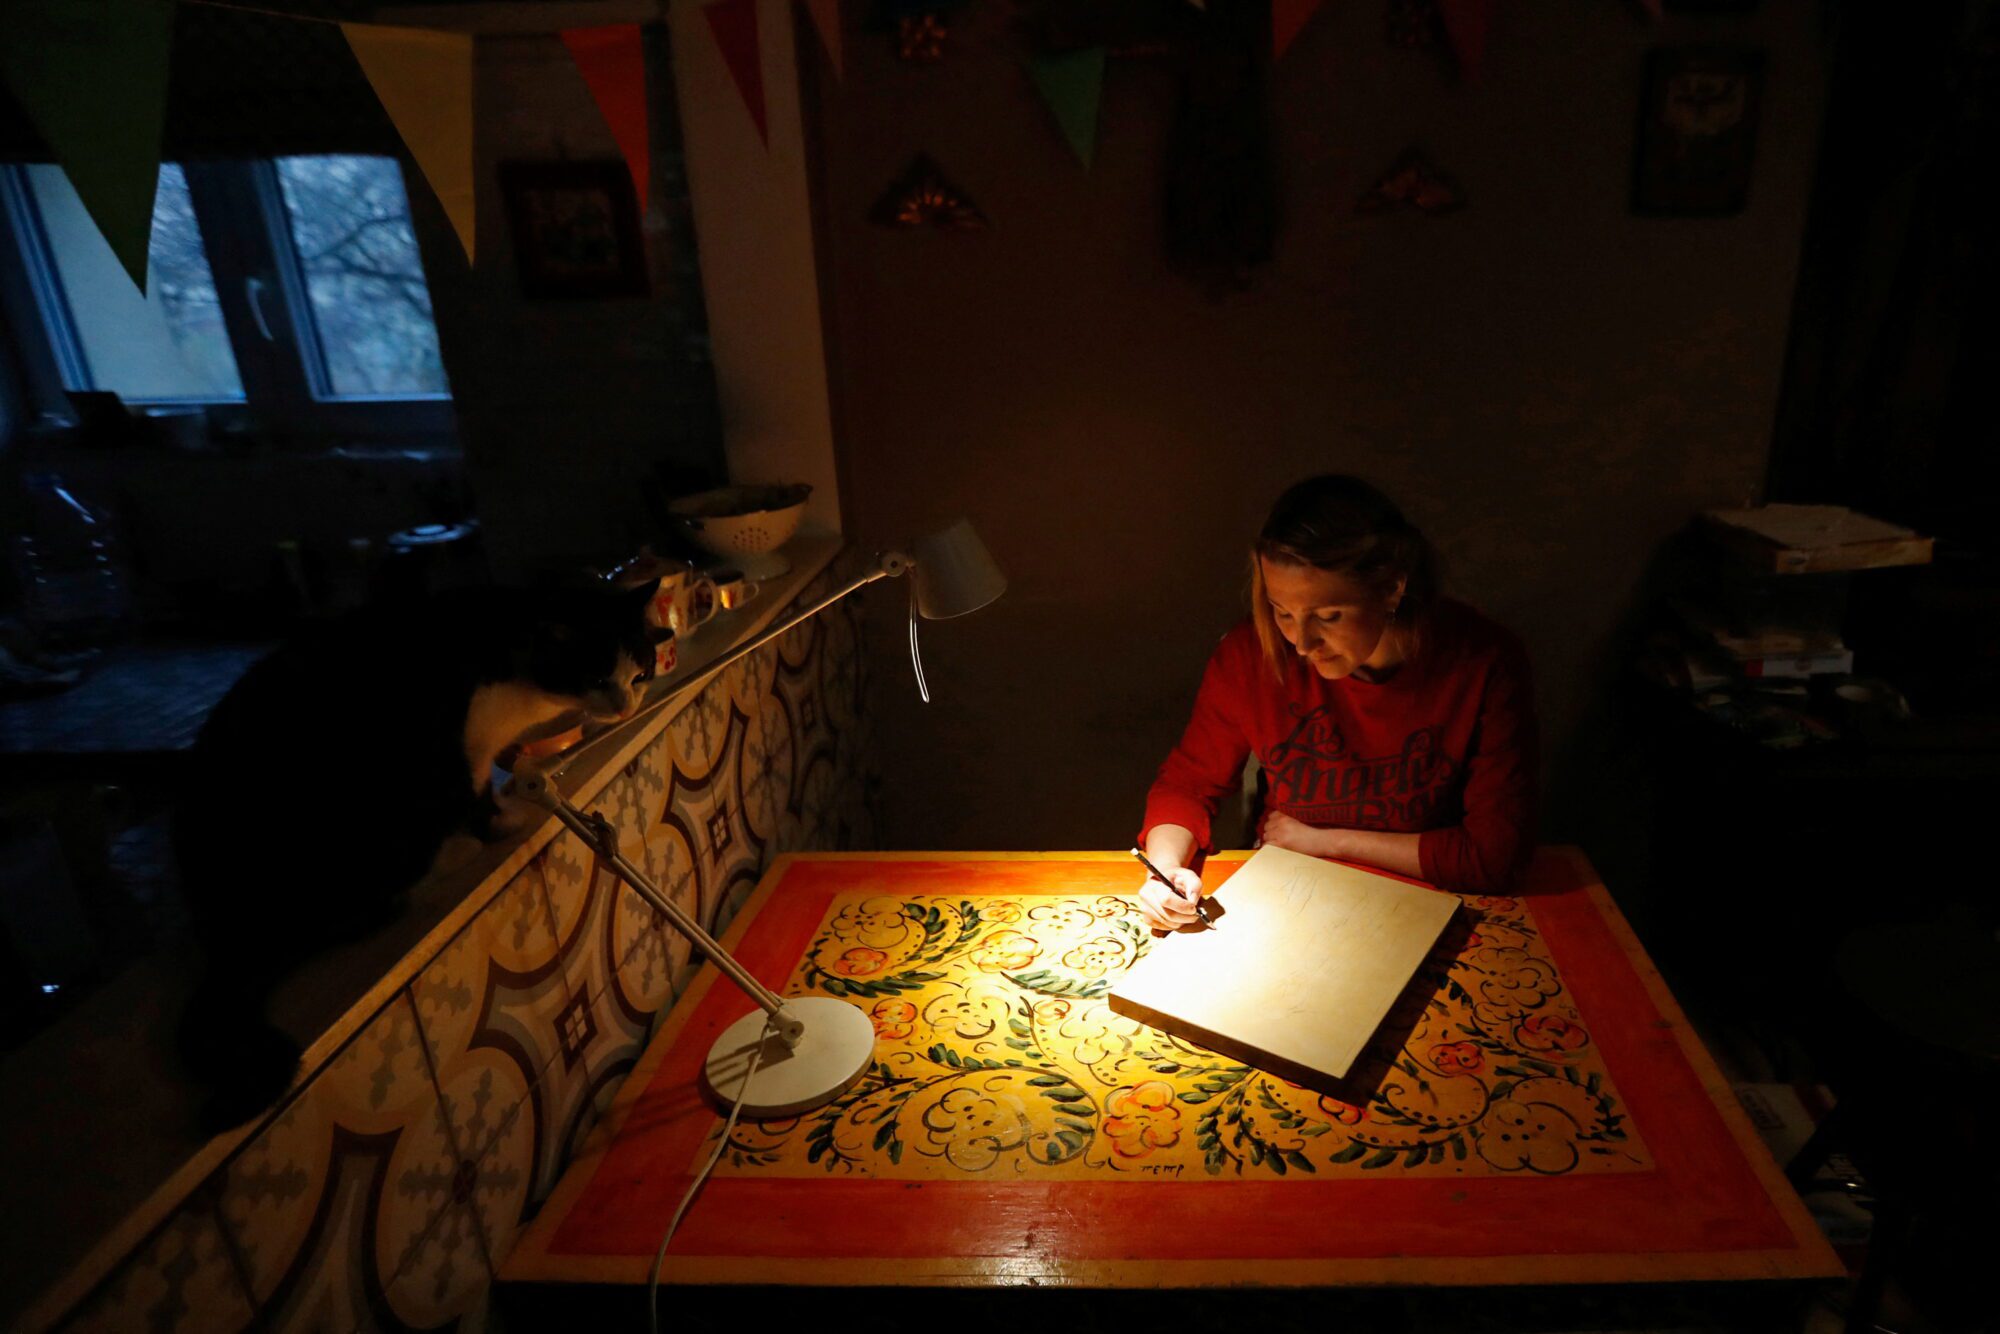 Ukrainian refugee Yulia Sarycheva lives in a house with Russian family in Prague